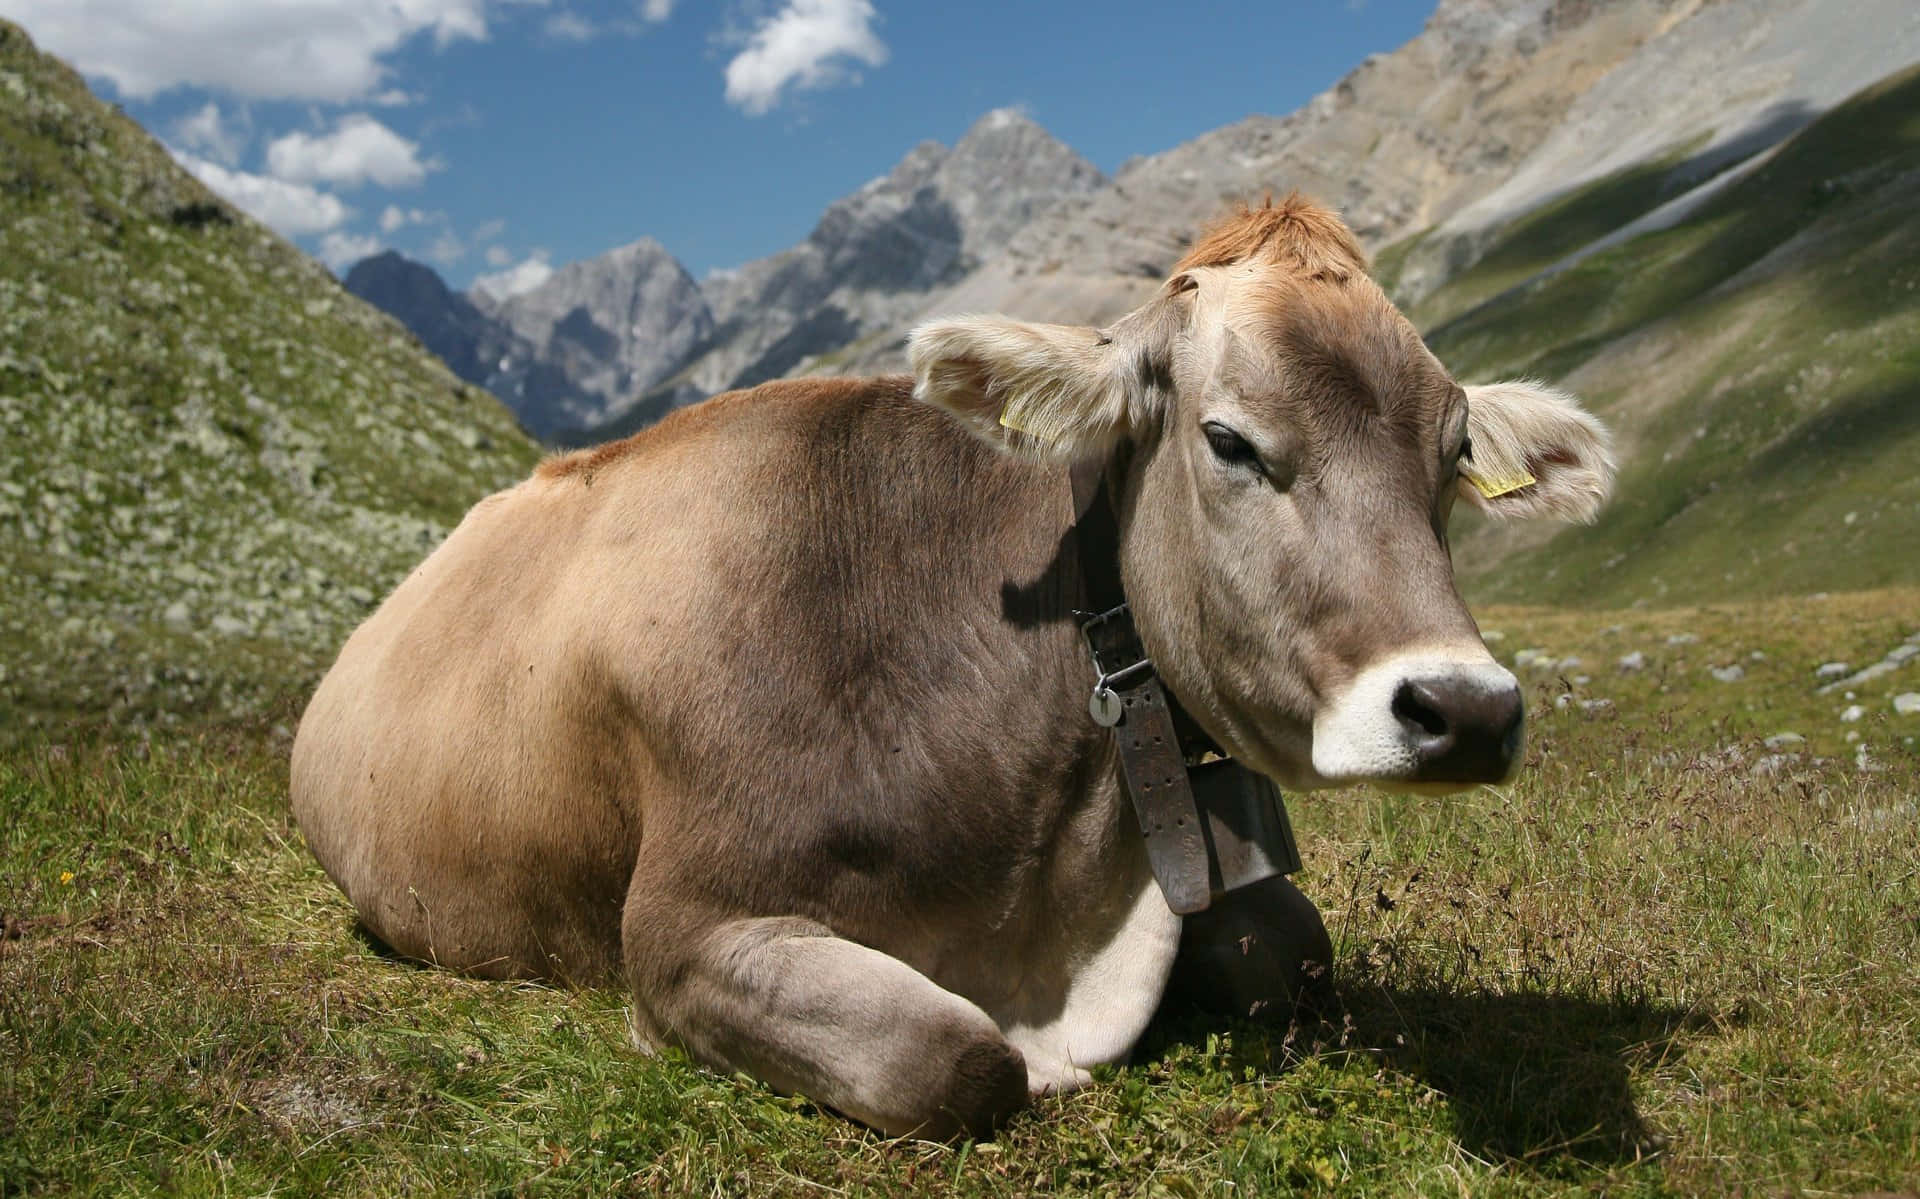 A peaceful moment in nature with a grazing cow